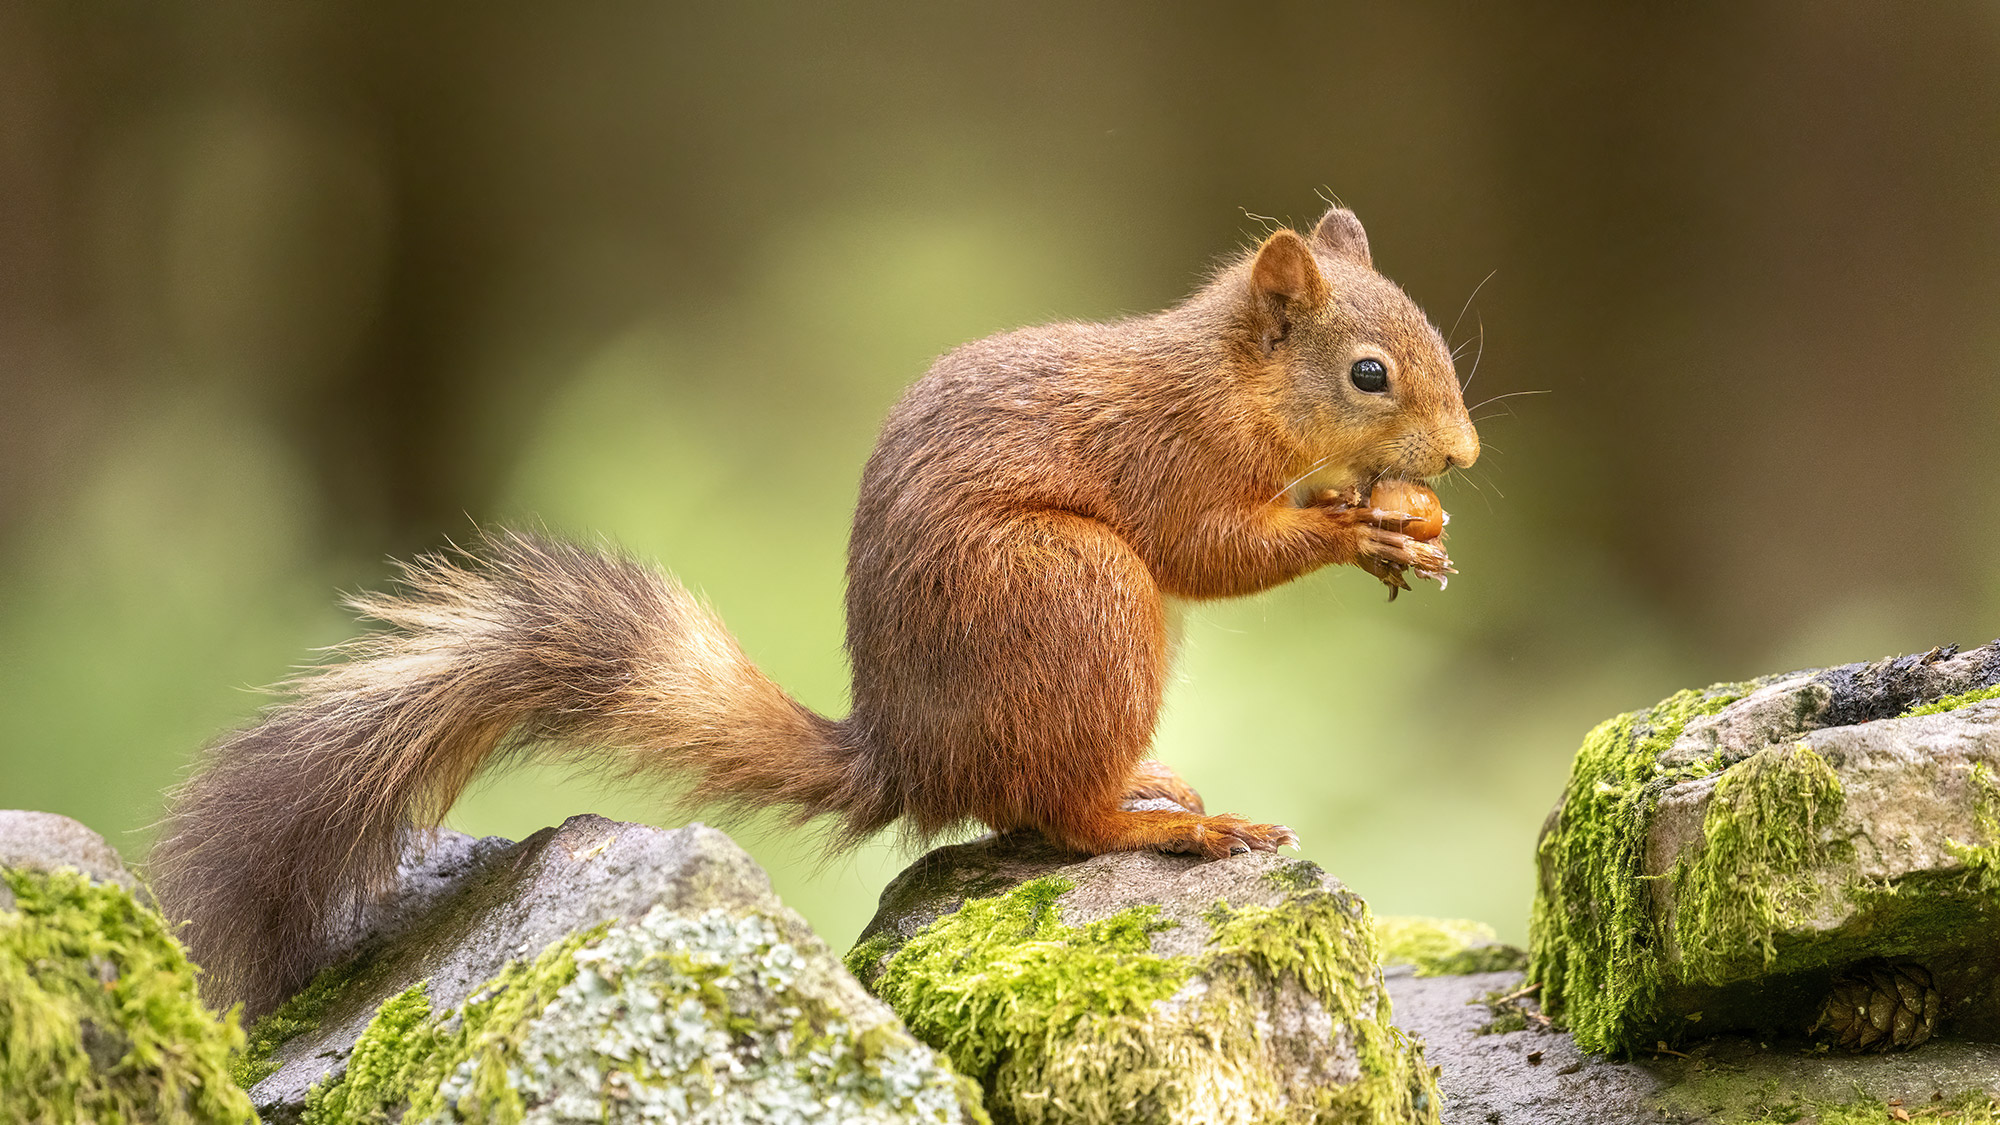 A Guide on Photographing Red Squirrels